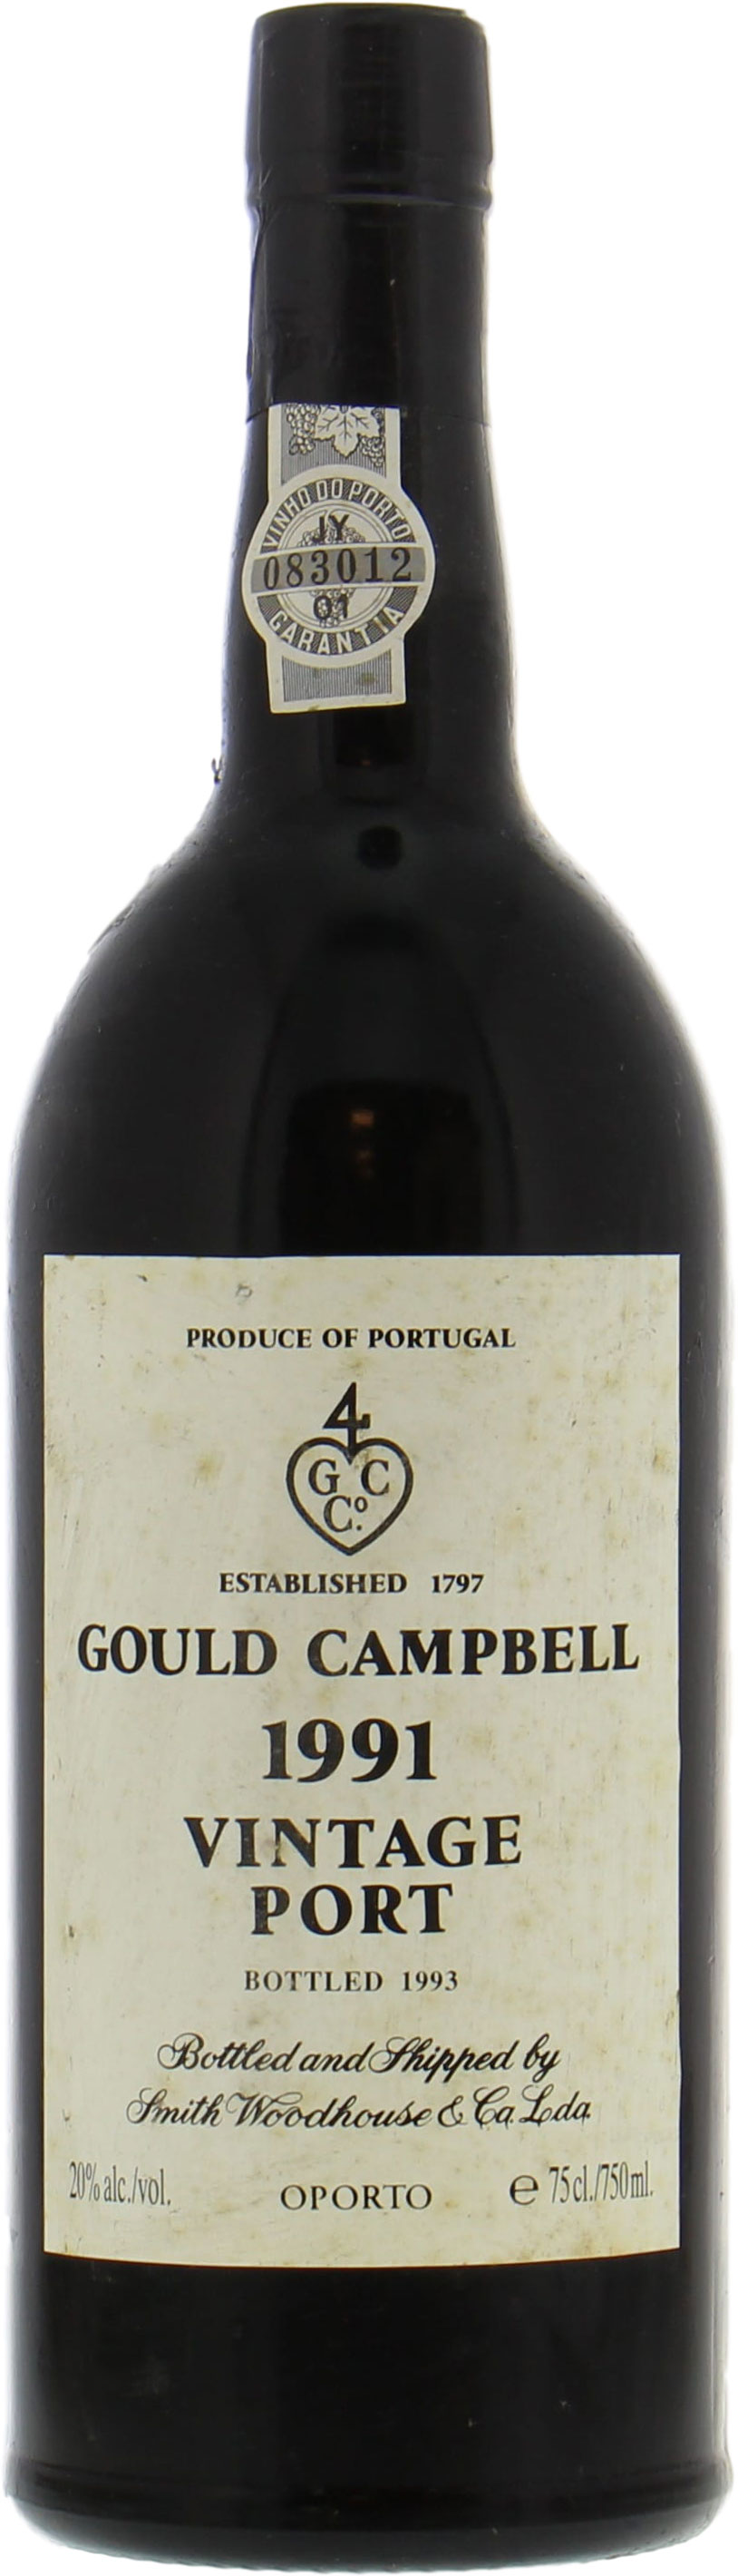 Gould Campbell - Vintage Port 1991 Perfect